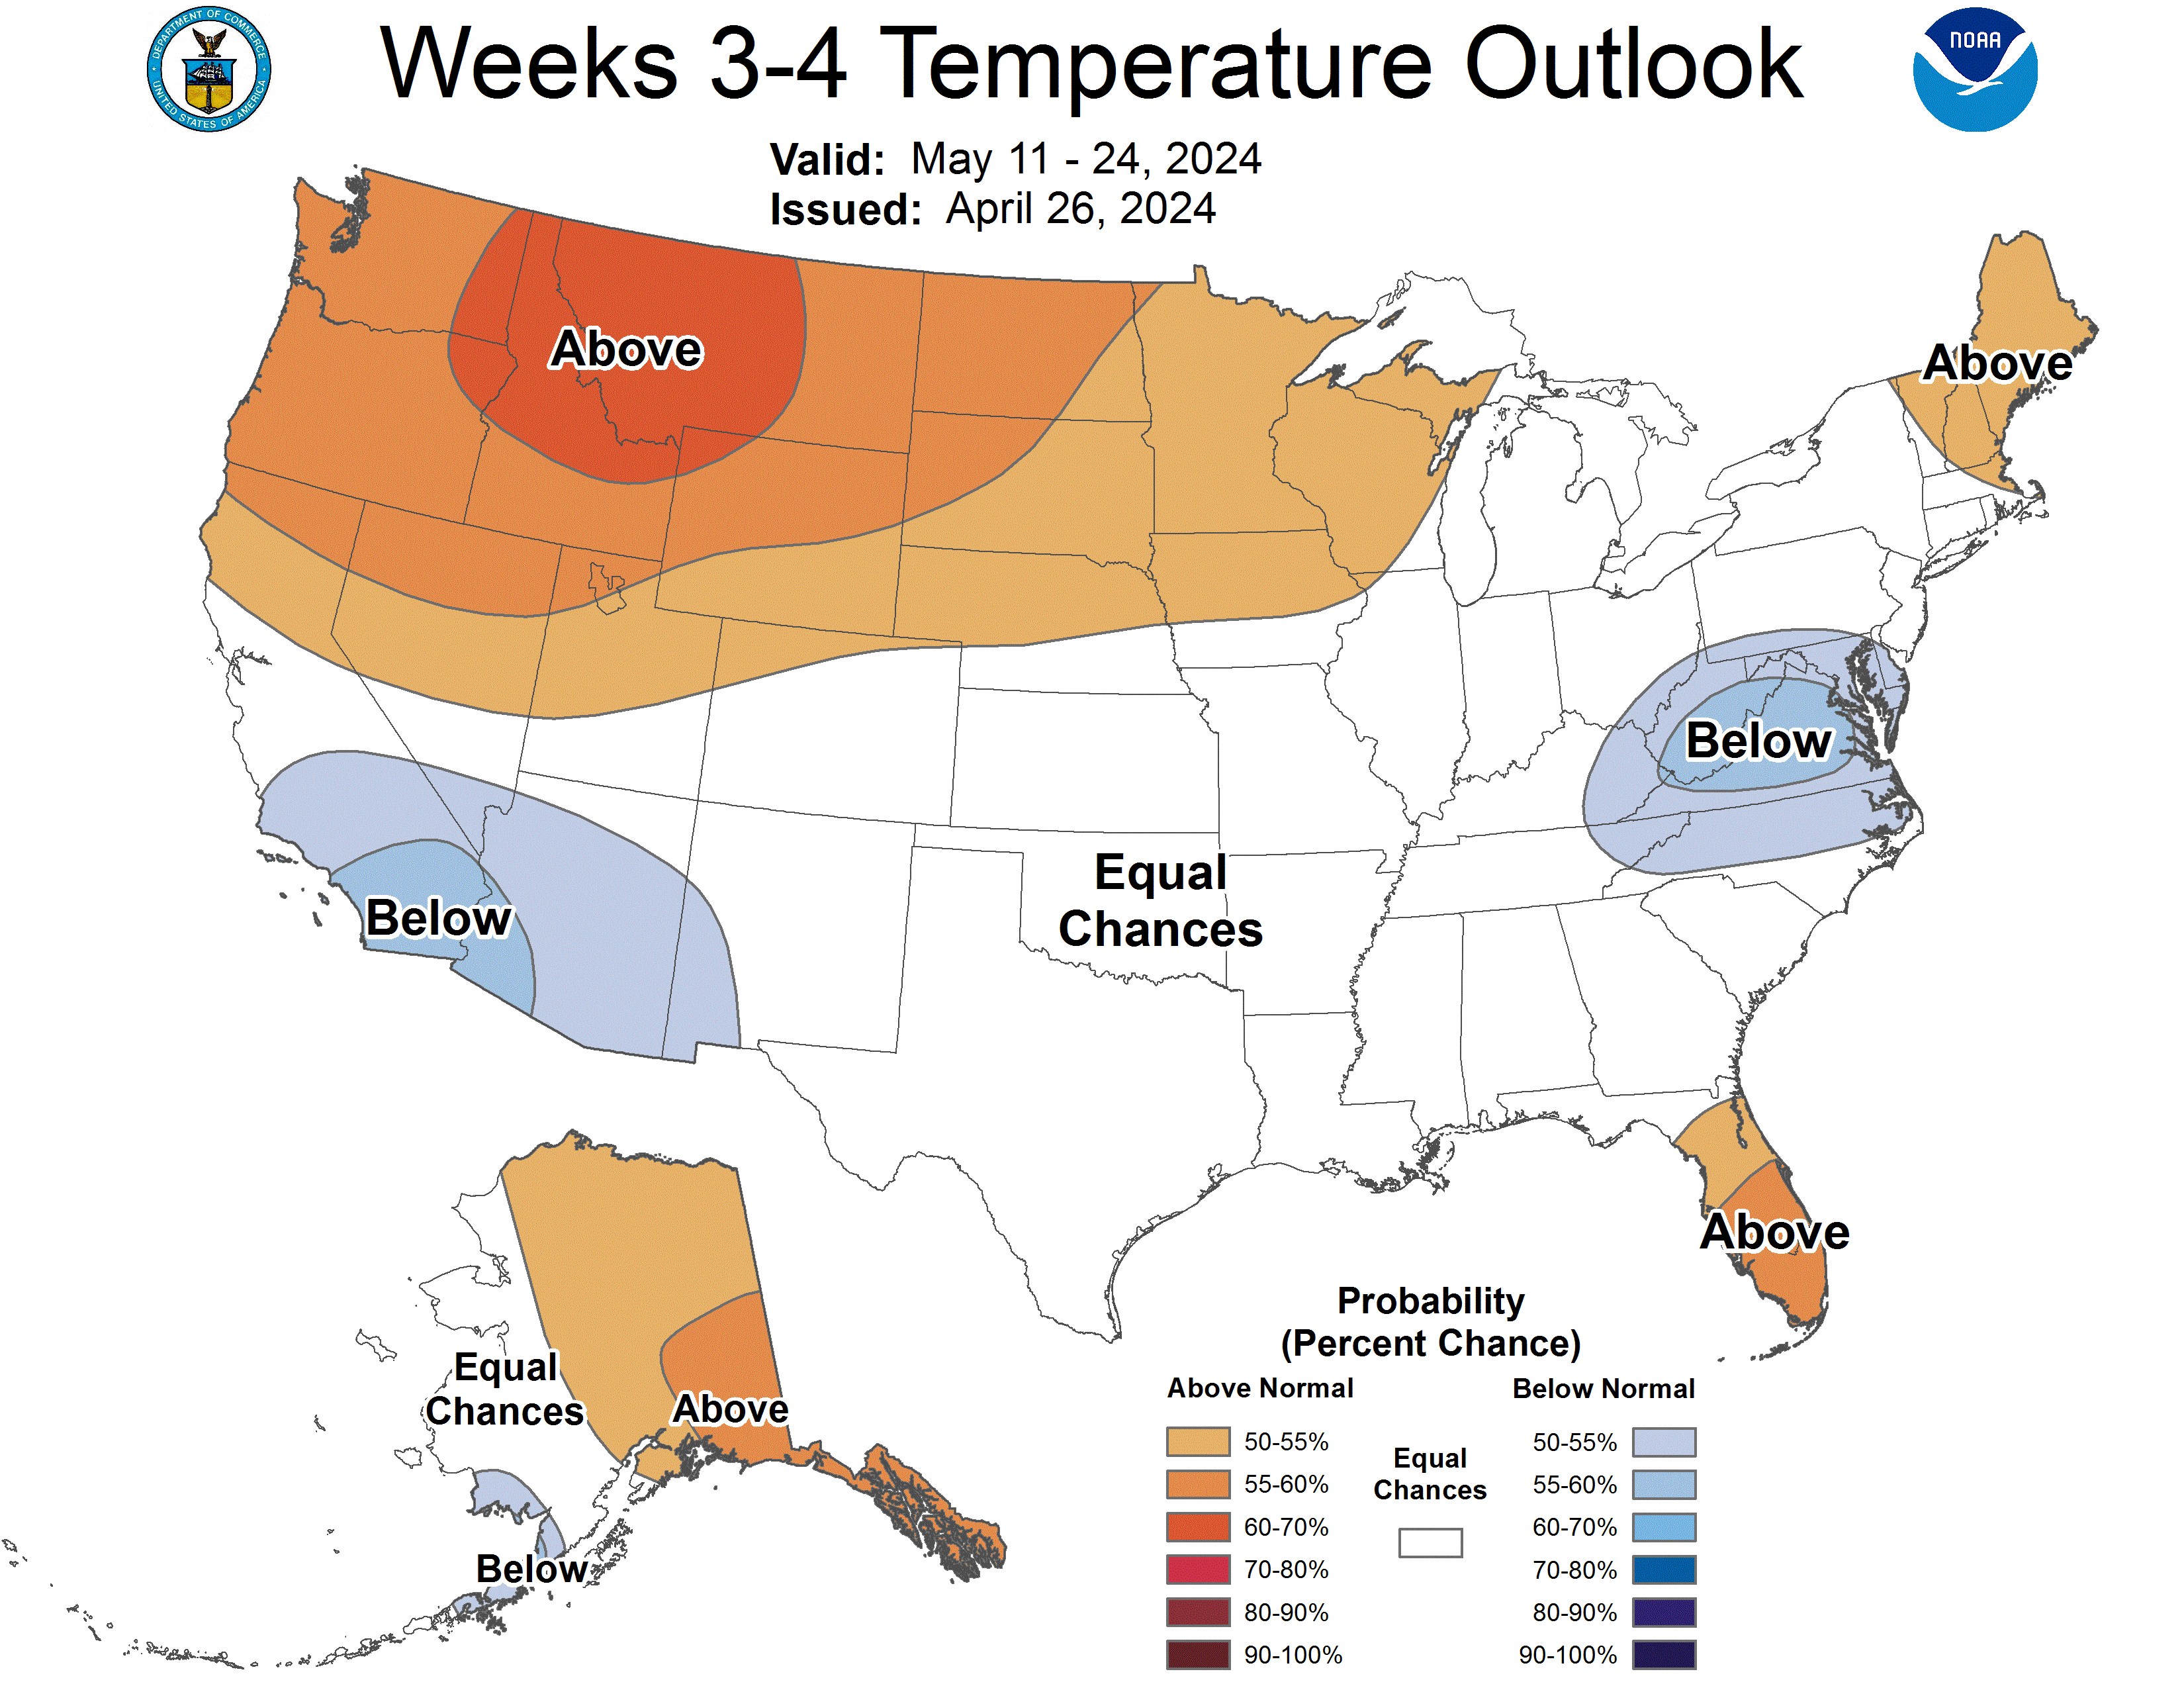 CPC's Week 3-4 Temperature Outlook showing areas with forecast above normal and below normal temperatures. This illustration also shows areas where there are equal chances of above and below normal temperatures. 